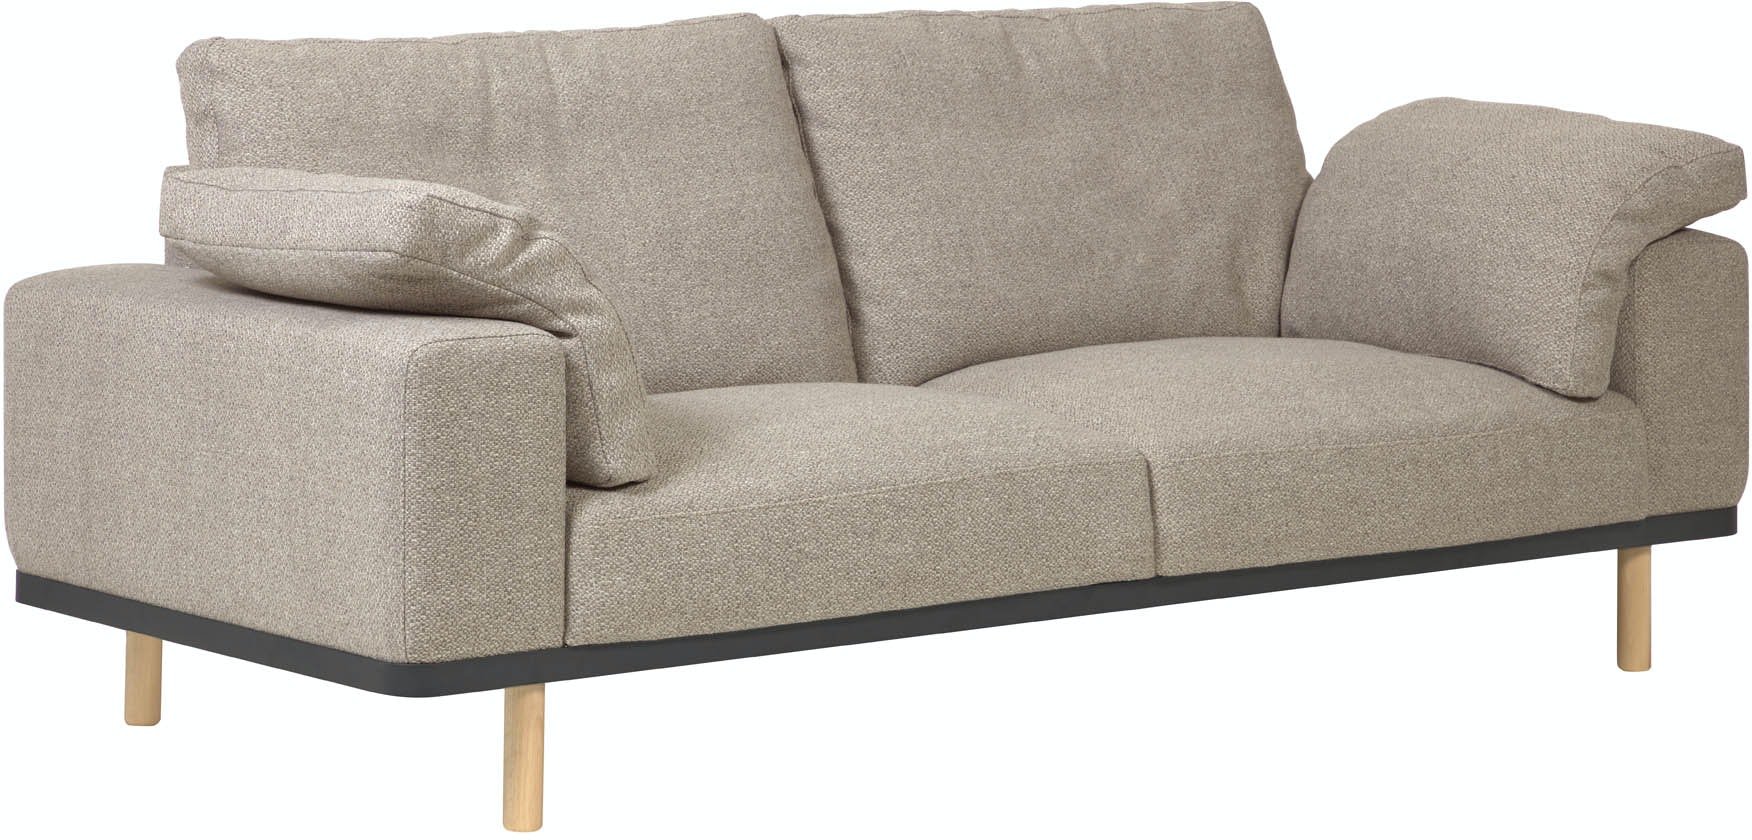 Noa, 3-personers sofa, Traditional, Stof by Kave Home (H: 94 cm. B: 230 cm. L: 100 cm., Beige/Natur)